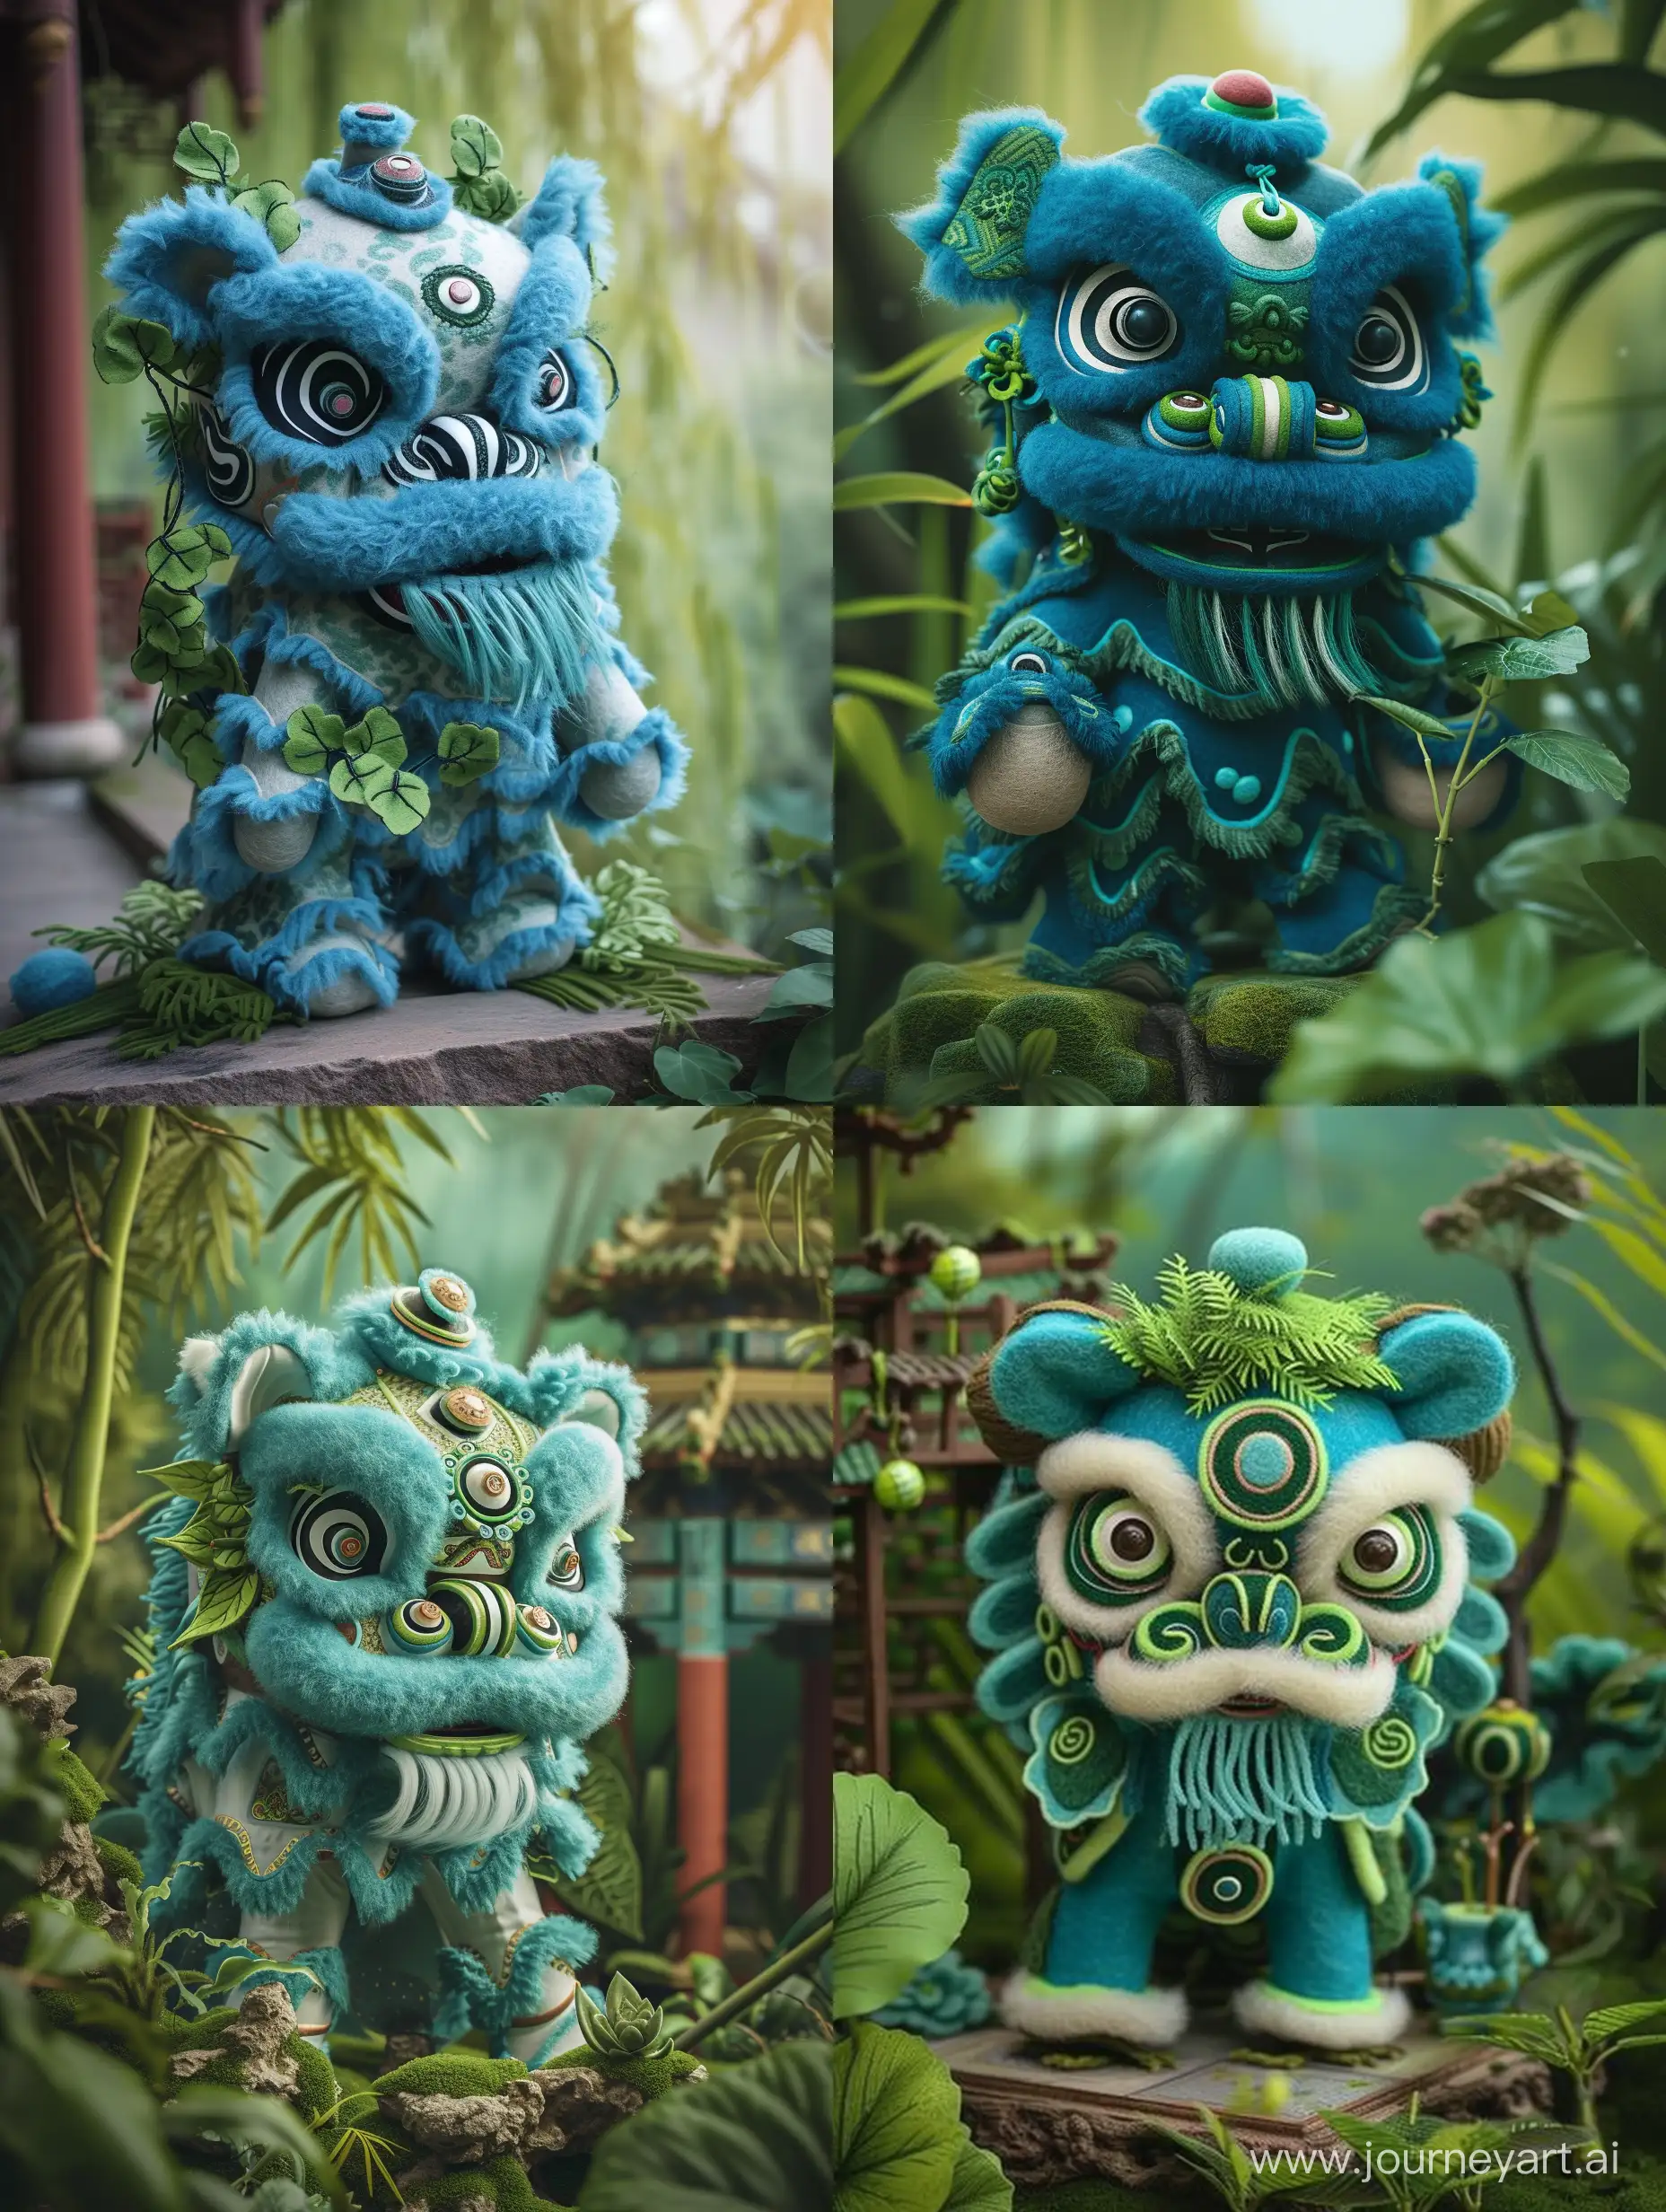 Blue Lion Dance Costume, cute, wool felt, green plants, green Chinese architecture, RON English, Russell dongjun lu style, surrealistic monochrome composition, rich and detailed, green core, Chinese punk, charming colors, realistic details, furry cartoon